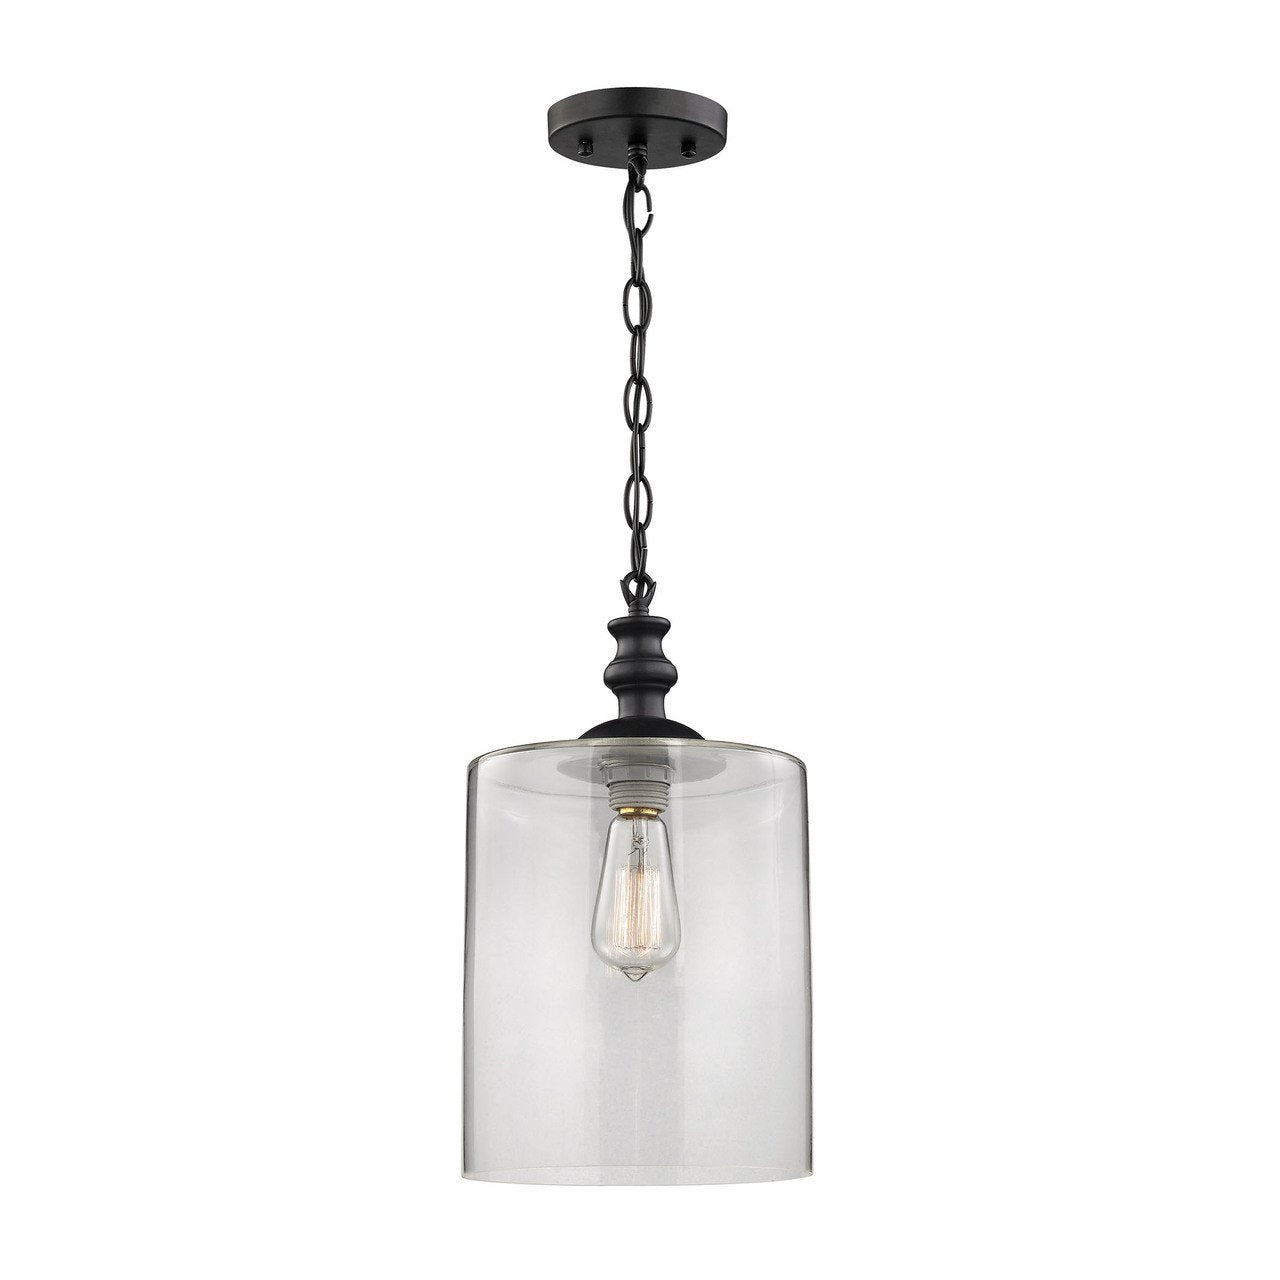 Elk Lighting, Inc. New Product ELK Lighting The Bergen 1 Light Pendant In Oil Rubbed Bronze And Clear Glass 46221/1 Sold By VaasuHomes